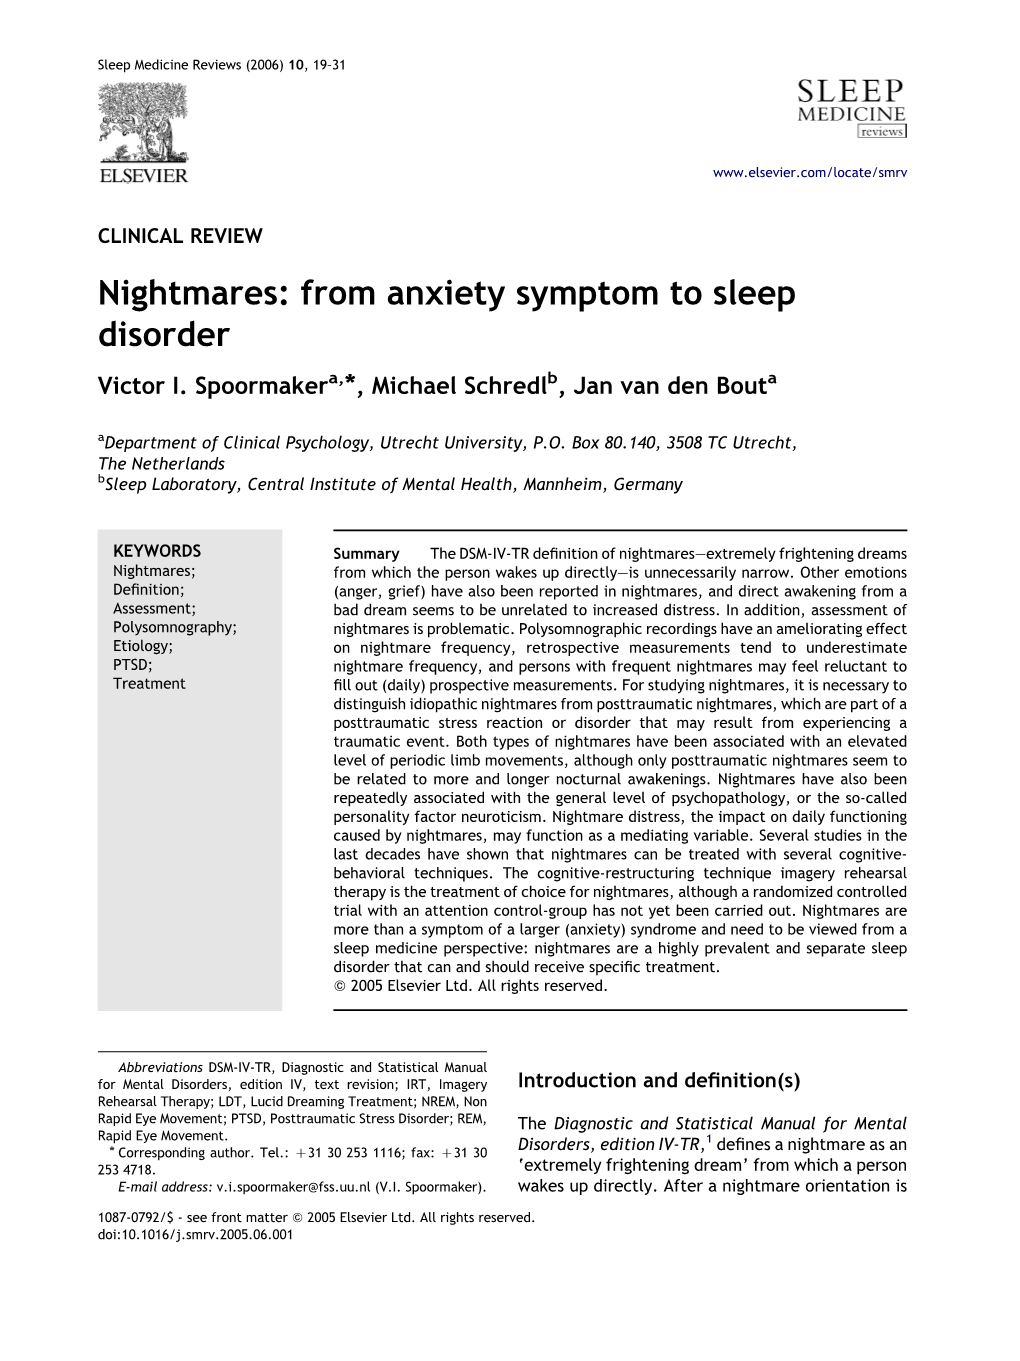 Nightmares: from Anxiety Symptom to Sleep Disorder Victor I